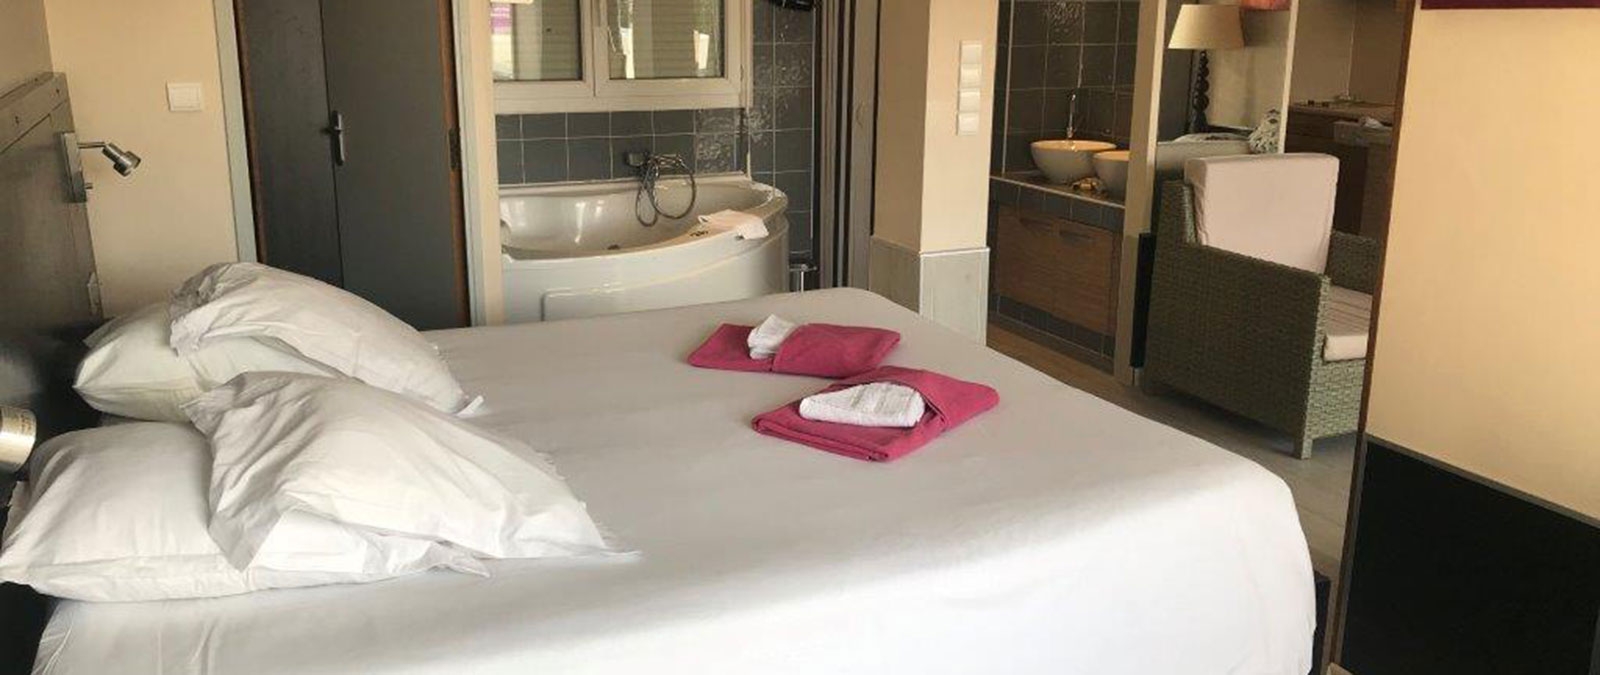 Room with Jacuzzi in a naturist suite for rent